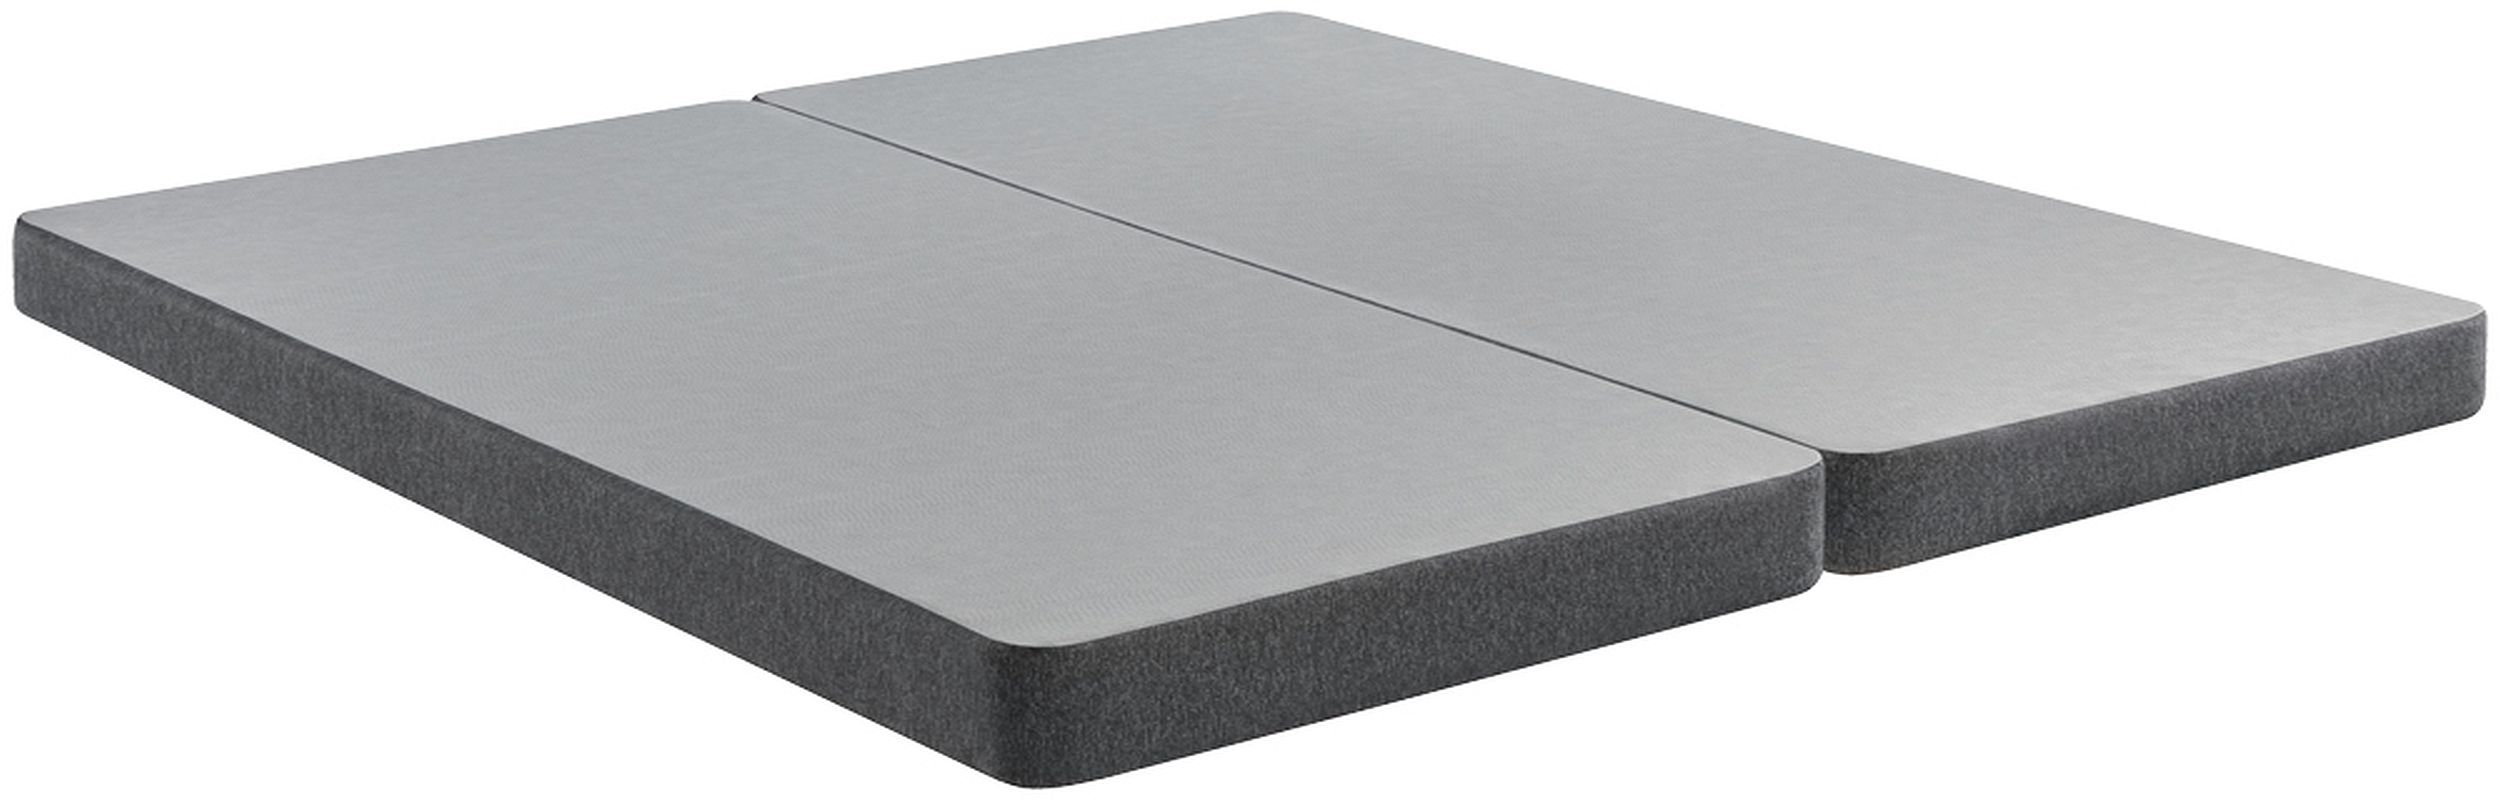 Beautyrest BR Boxspring Low Profile SP Qn